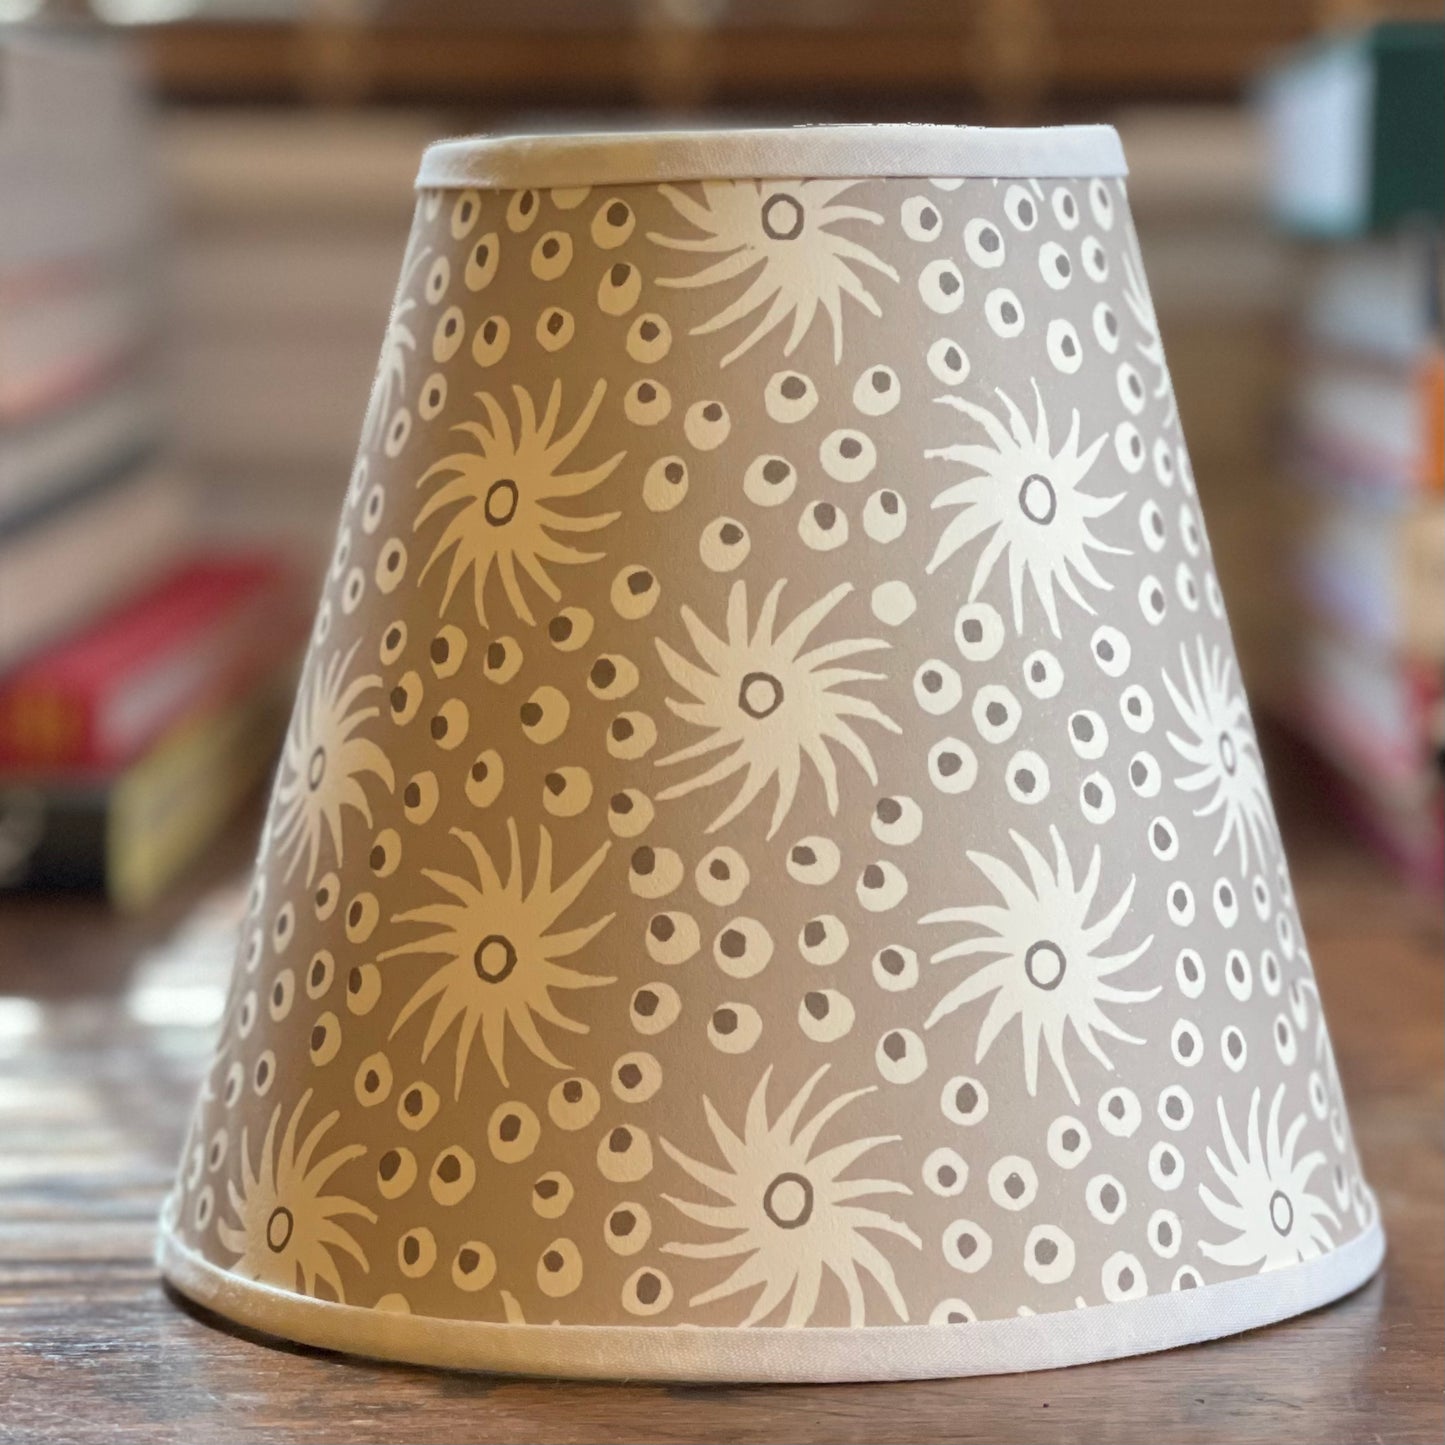 Small Clip-On Lampshade. Patterned Paper from England. "Milky Way" Smoke. White Trim.